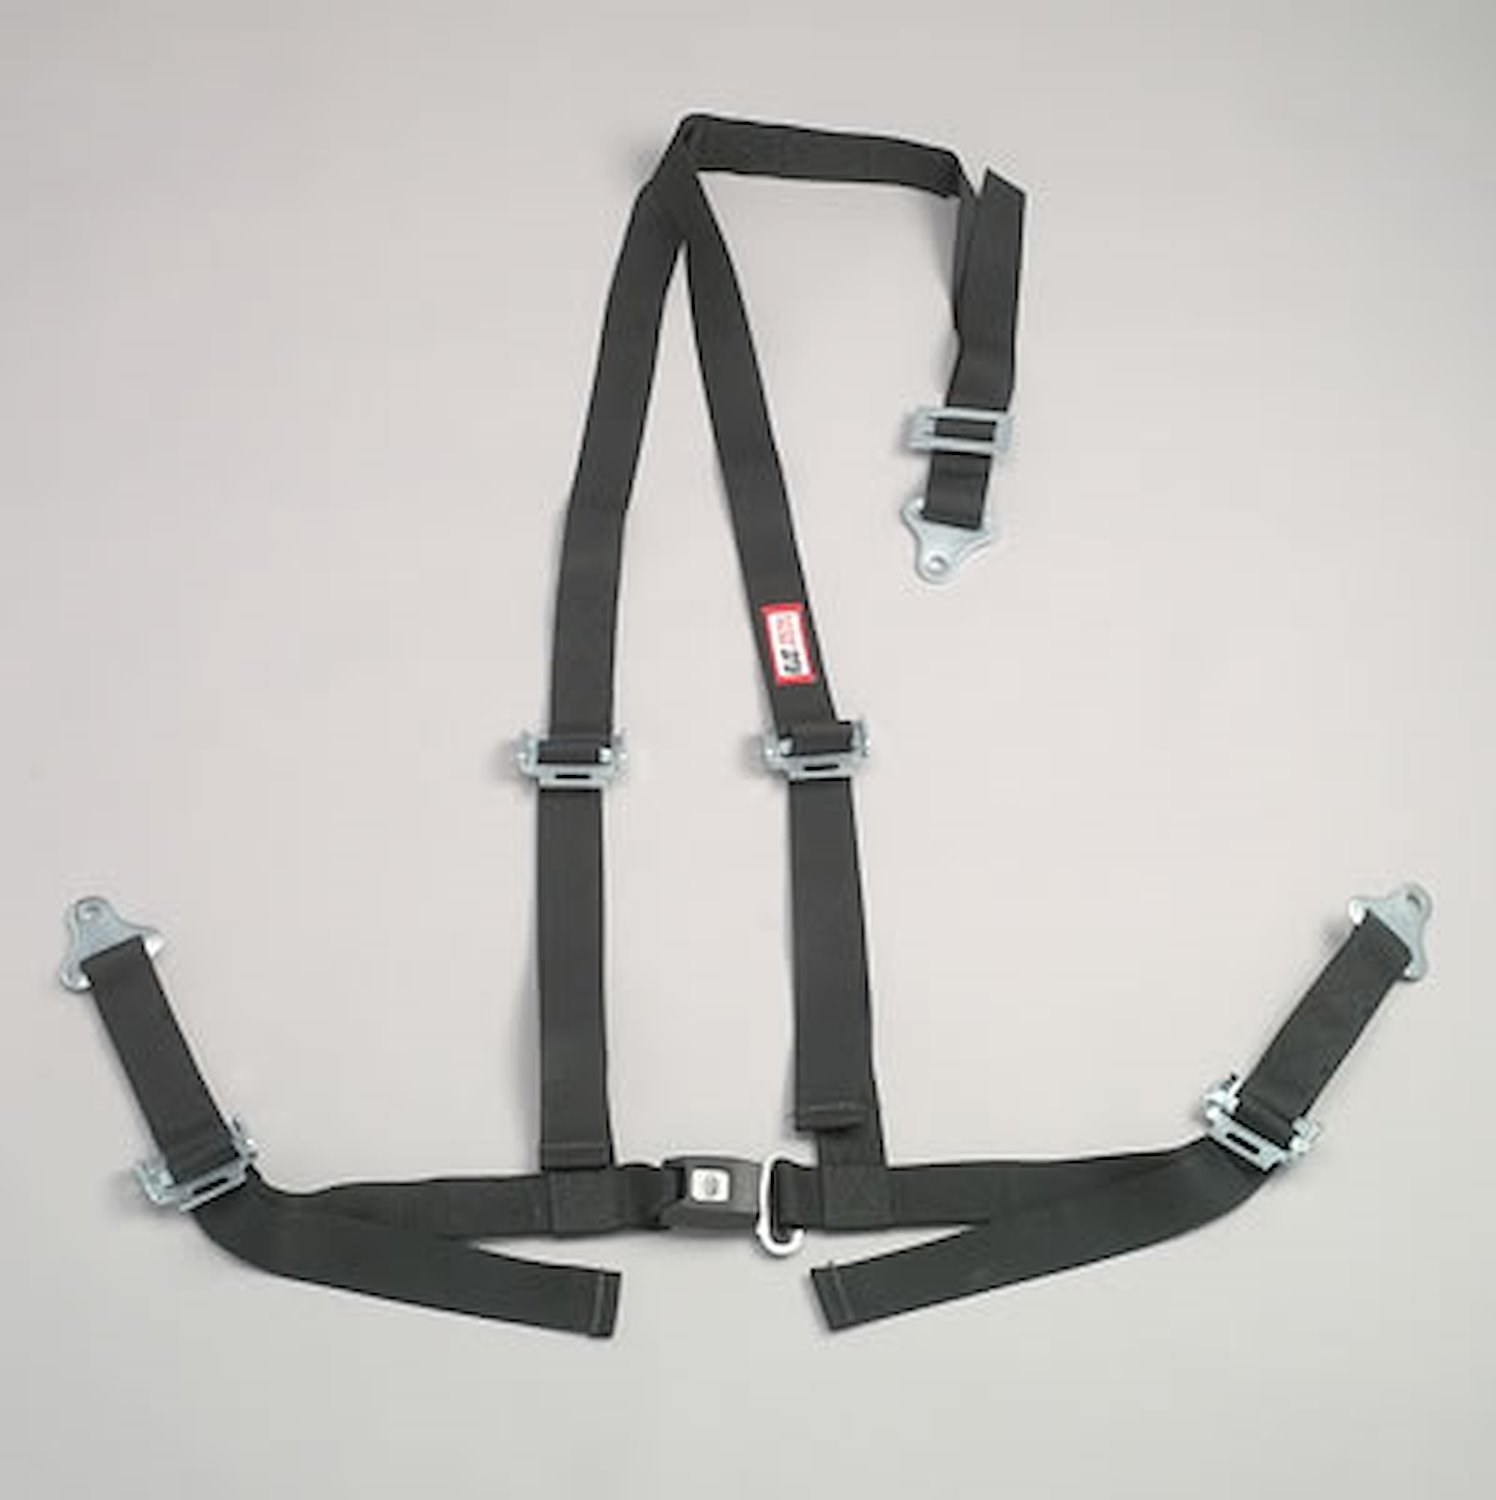 NON-SFI B&T HARNESS 2 PULL UP Lap Belt 2 S. H. V ROLL BAR Mount ALL SNAP ENDS ORANGE